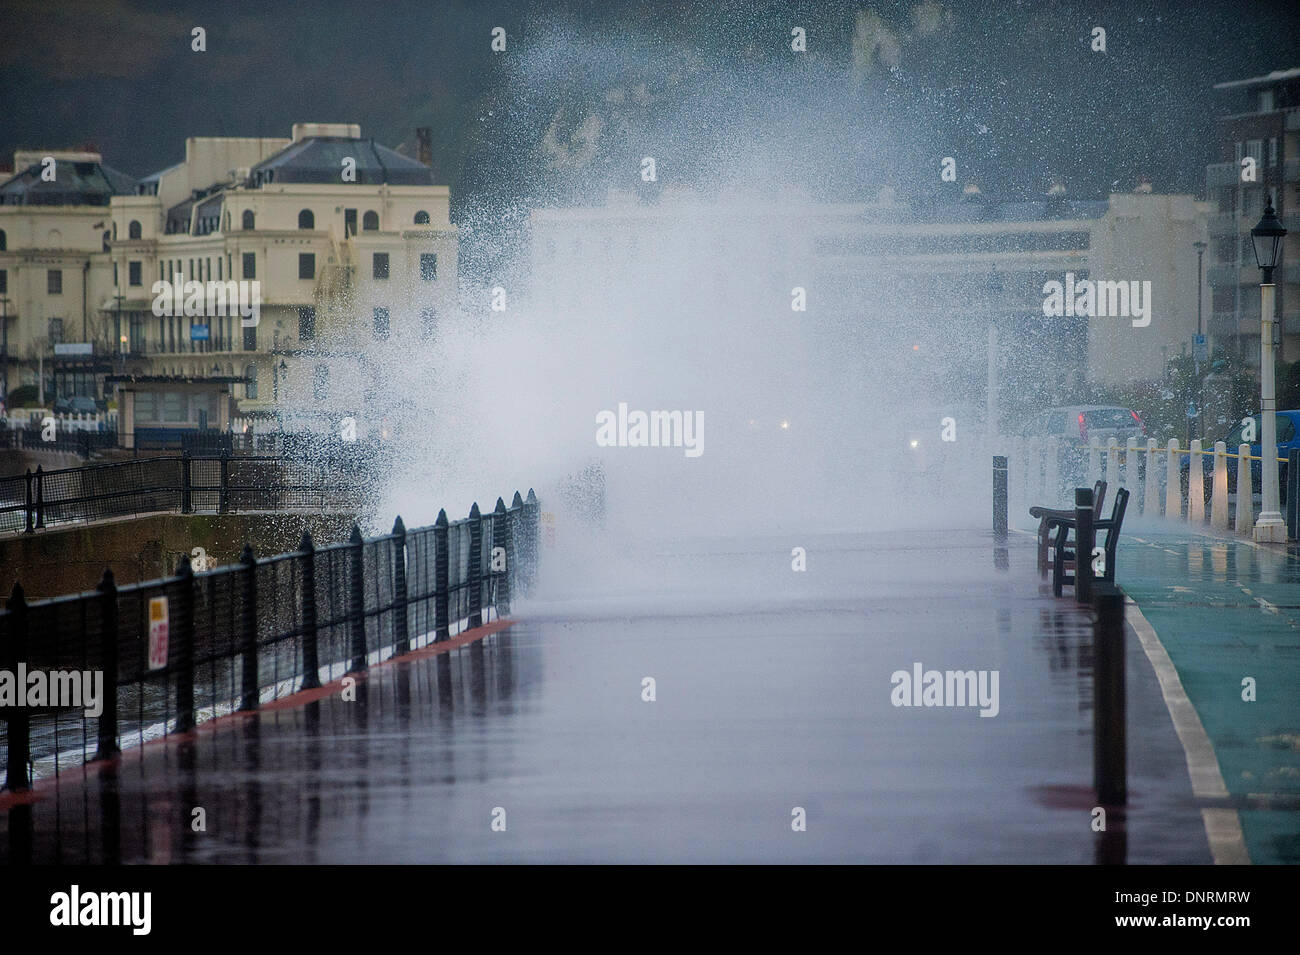 Dover, Kent, UK. 4th Jan, 2014. High wind, rain and waves hit the town of Dover, Kent. 4th January 2014. Photo by Brian Jordan/Alamy Live News Stock Photo